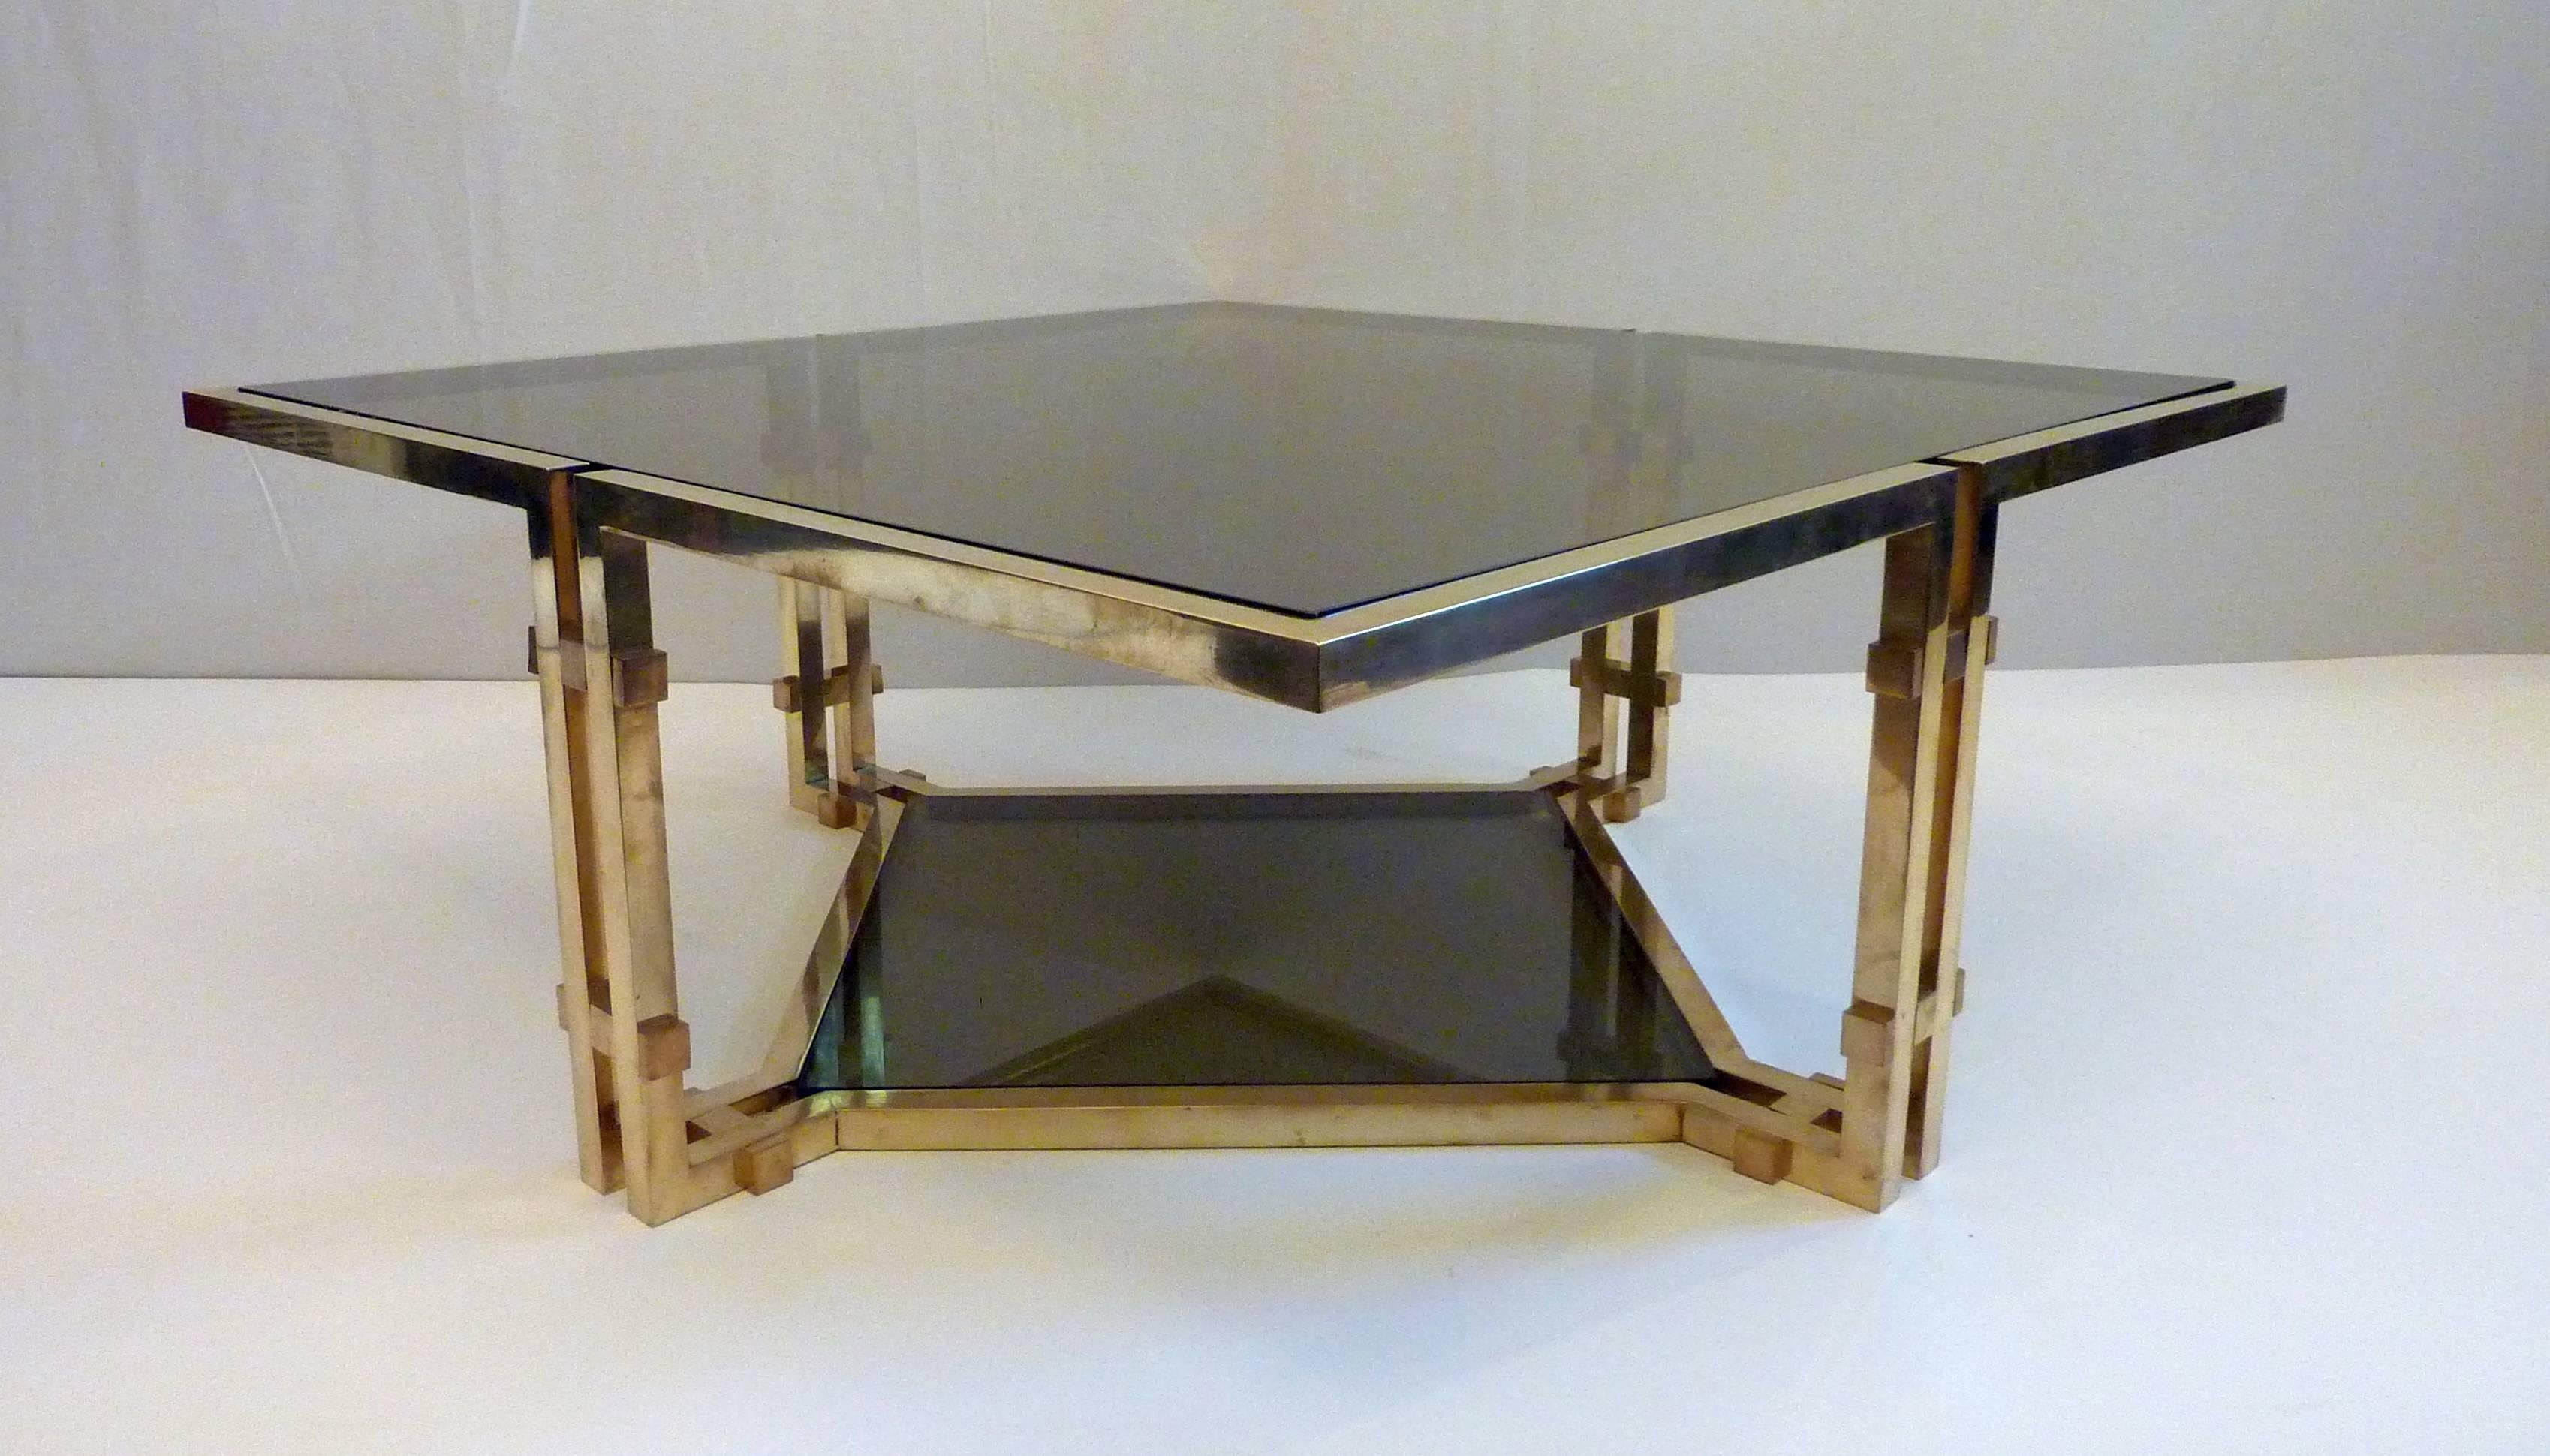 Solid coffee table designed by Romeo Rega. The coffee table has a brass structure with smoked glass square top as well as a bottom level with glass as well. Square bolts is holding the structure together.